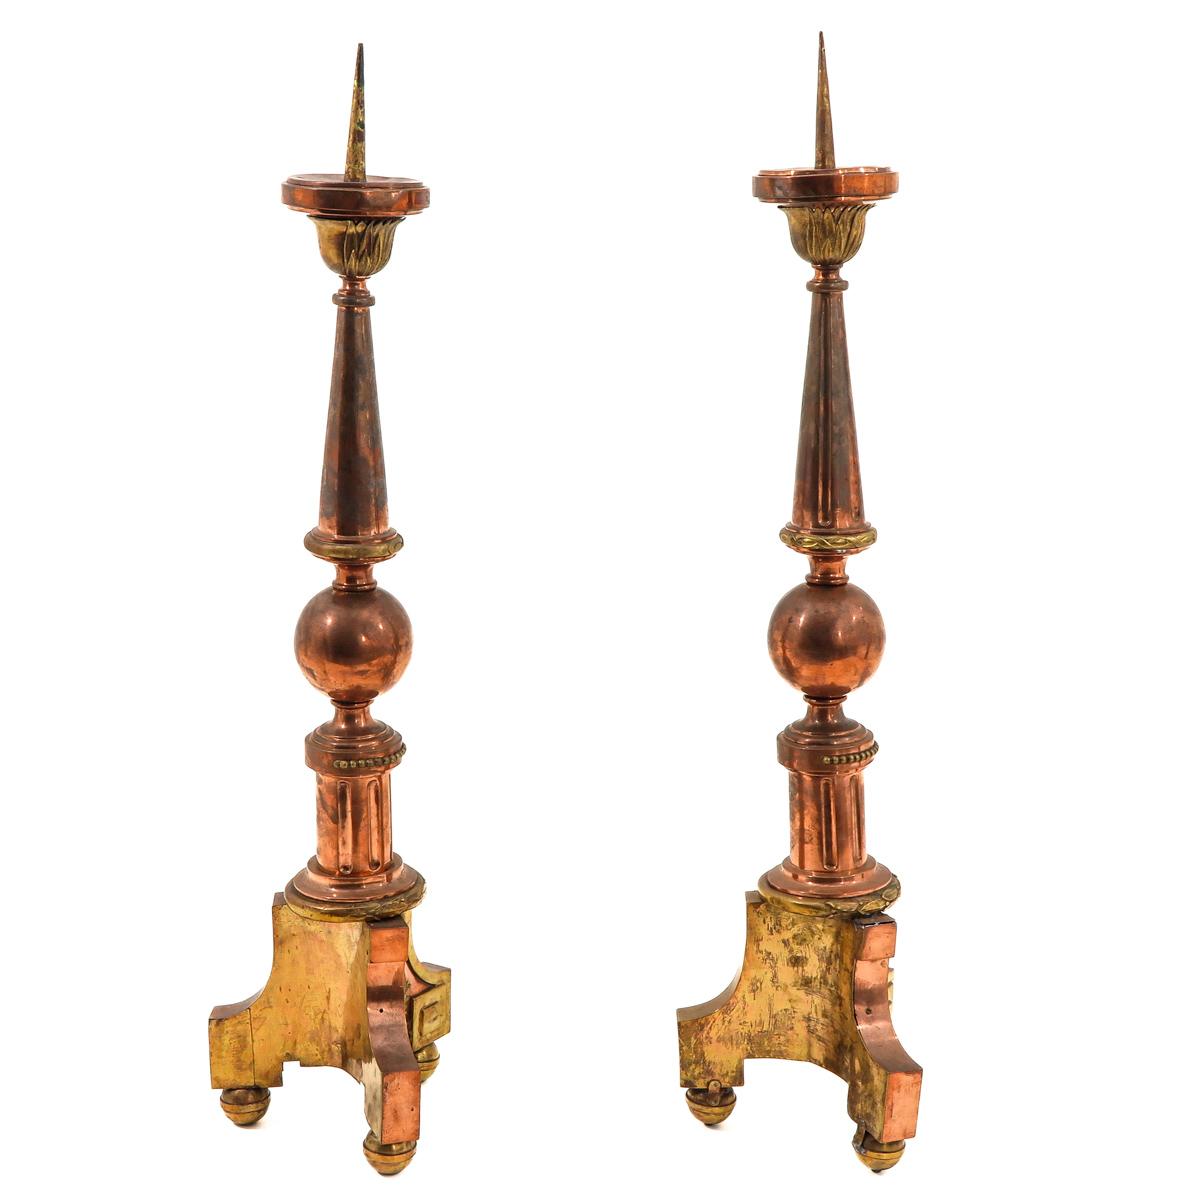 A Pair of Altar Candlesticks - Image 4 of 10